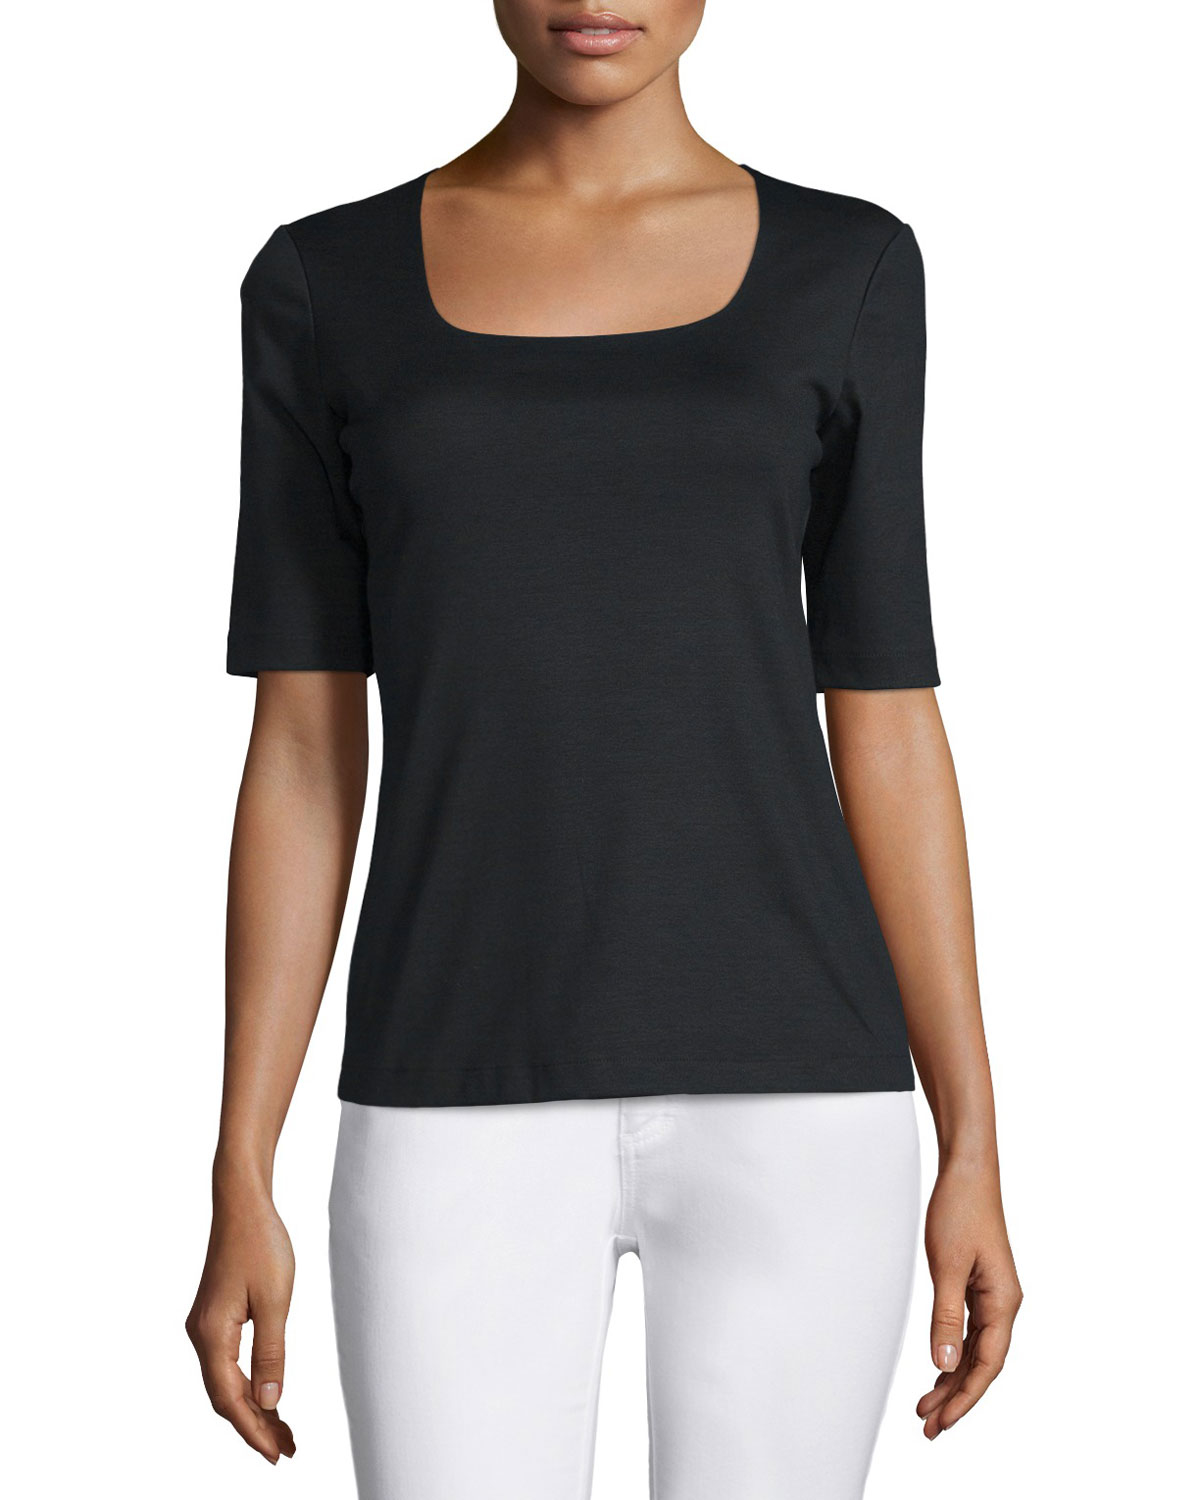 Lafayette 148 new york Half-sleeve Square-neck Top in Black | Lyst